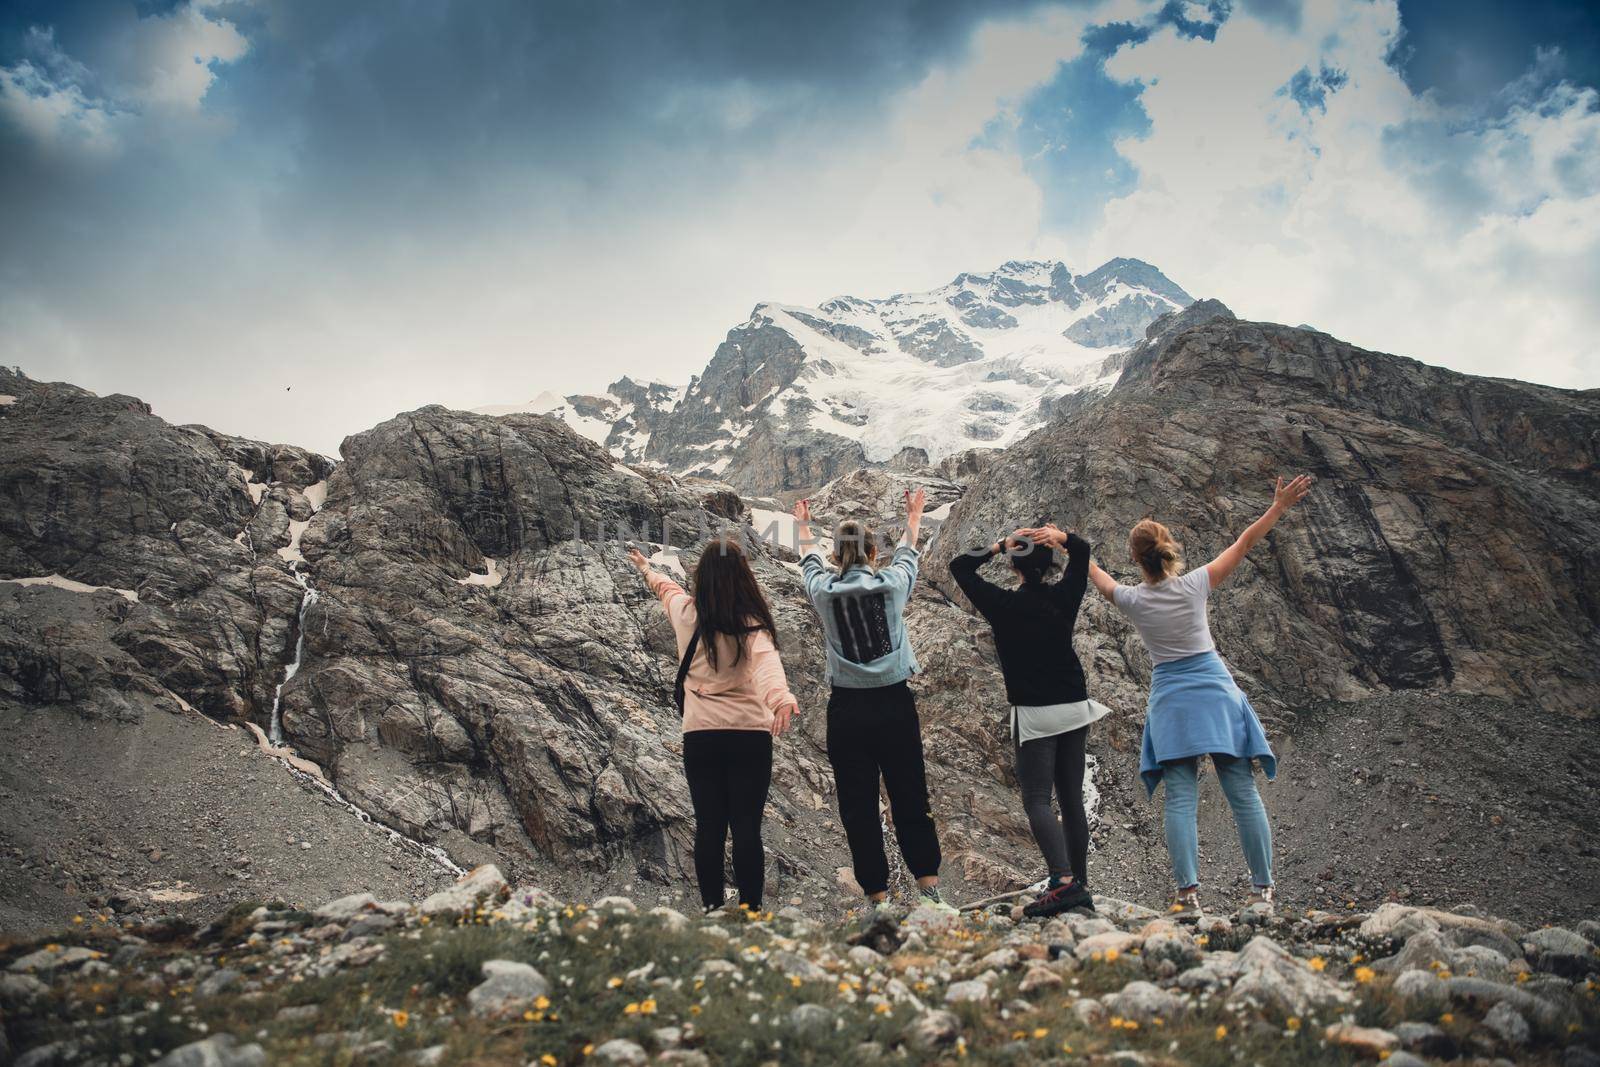 A group of girlfriends climbed high in the mountains